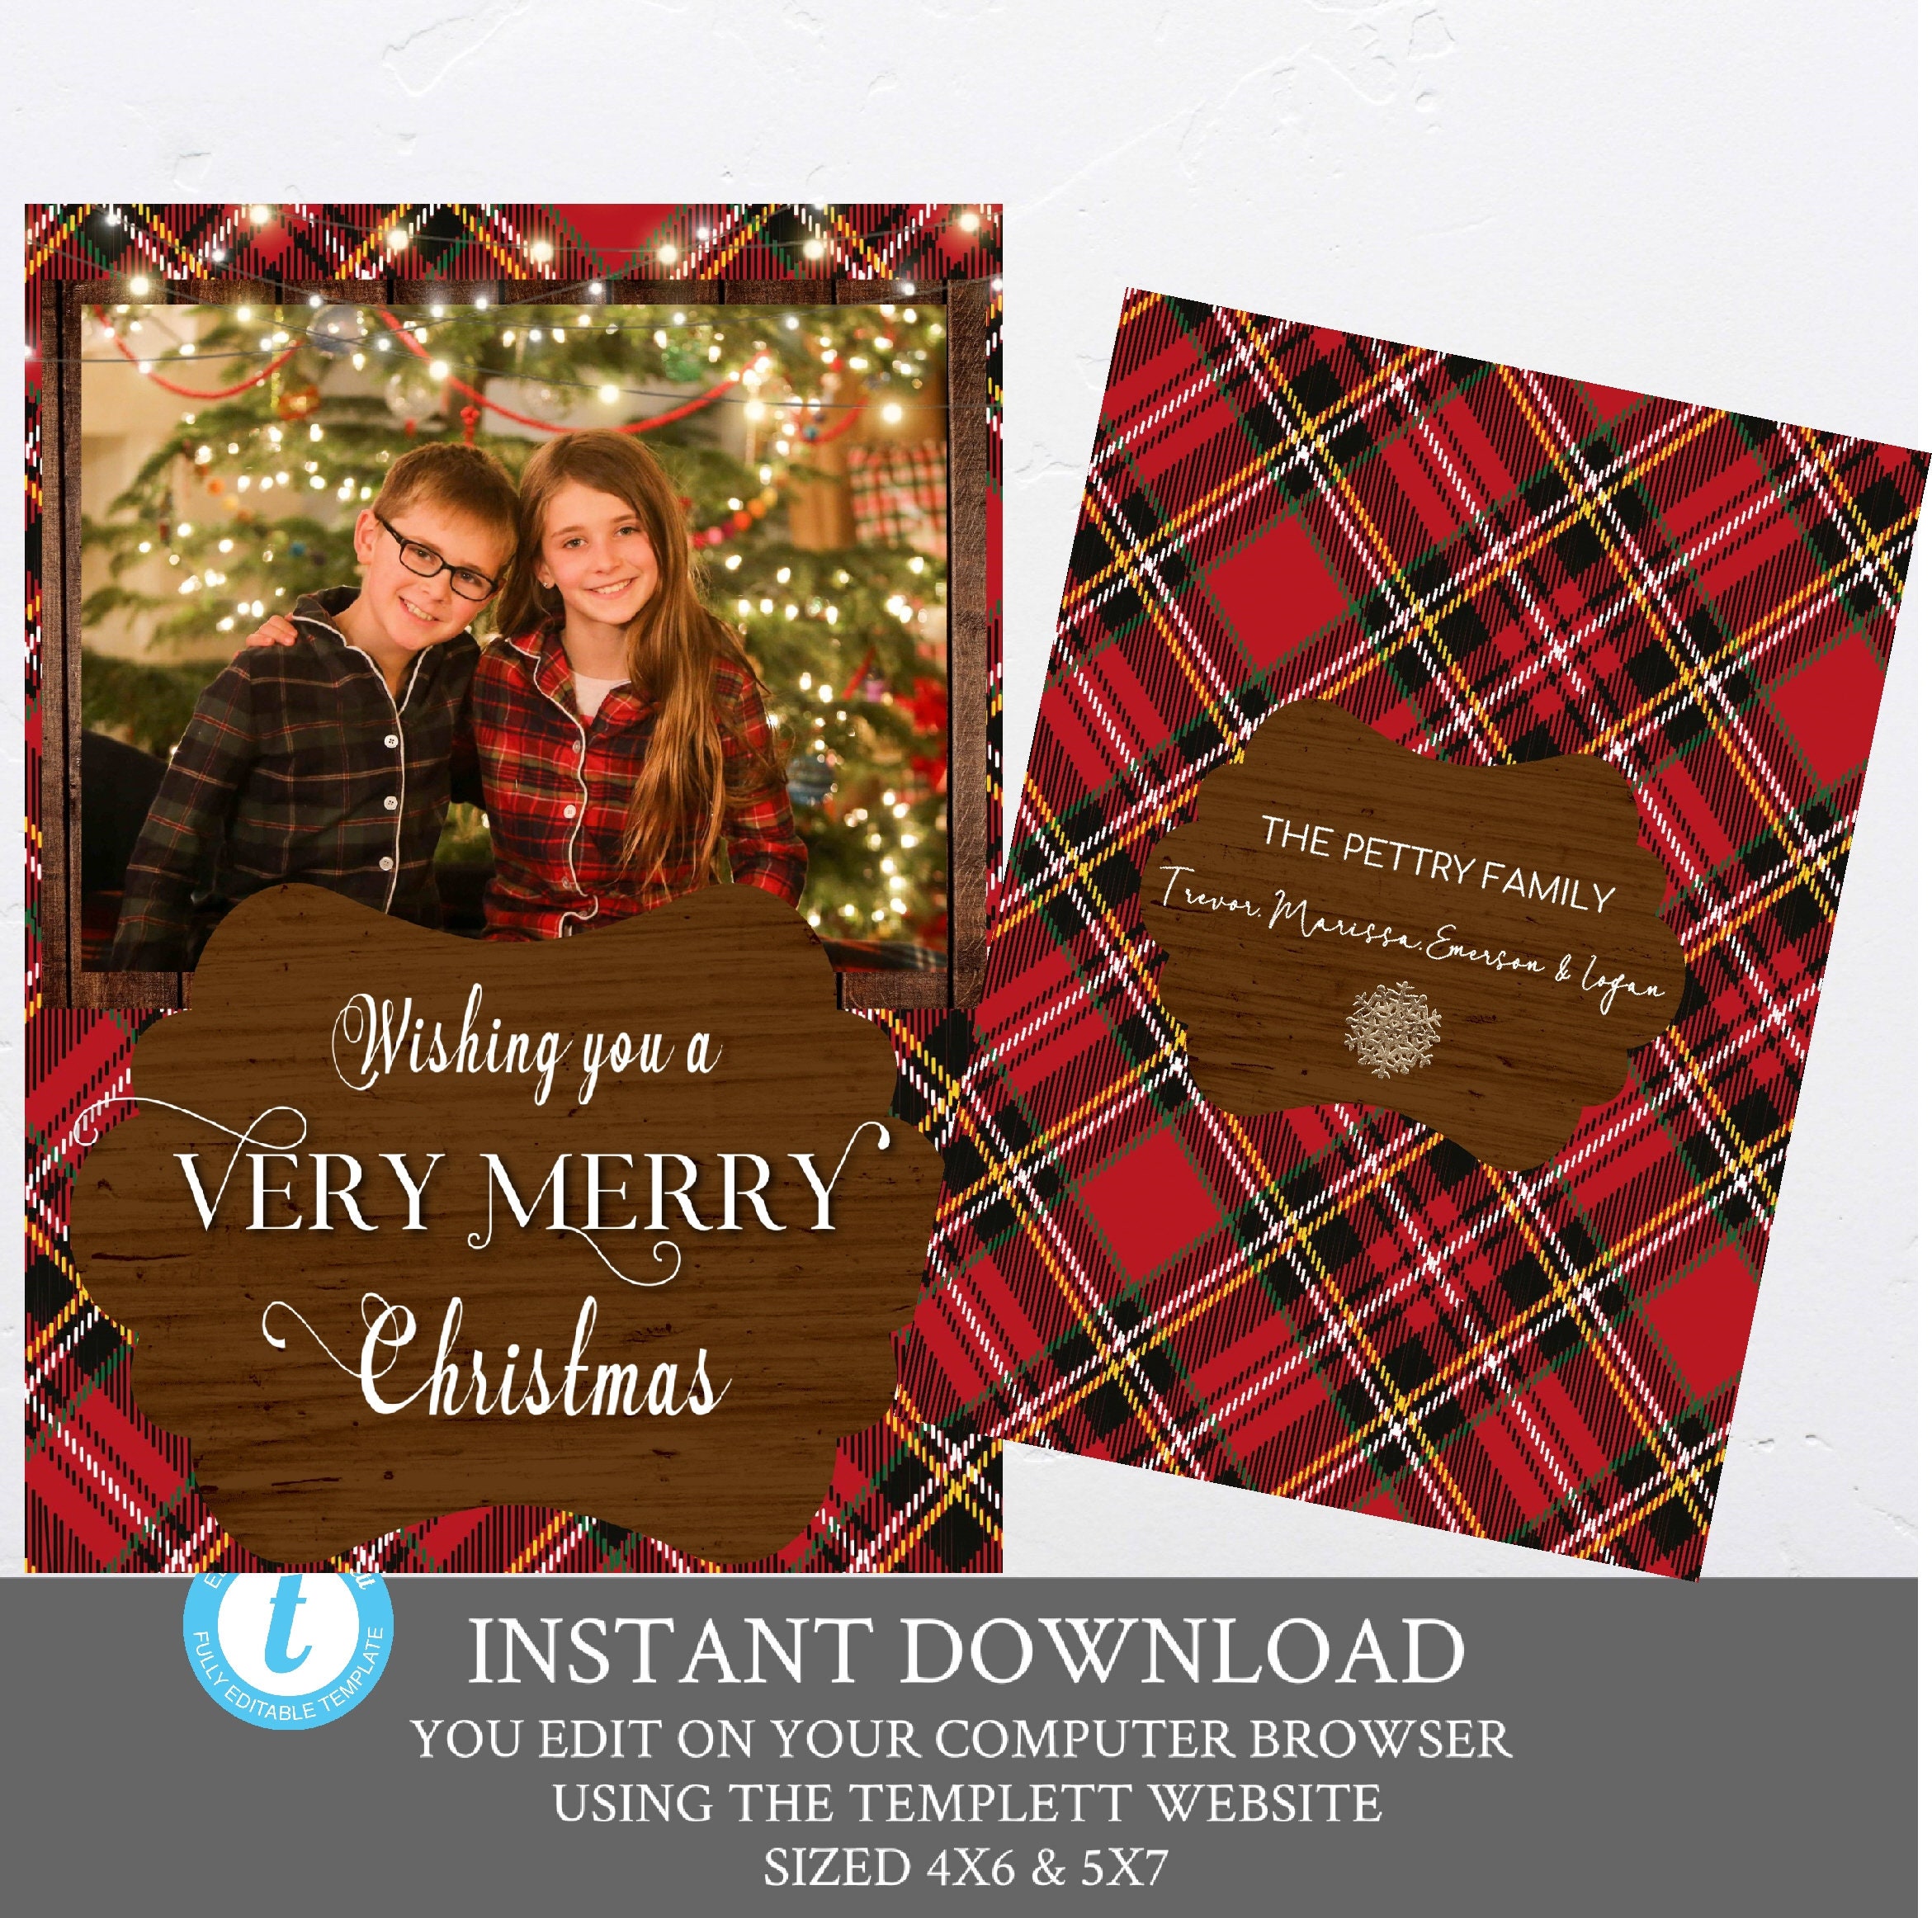 Set 22 **** Instant Download**** Holiday Photo Card Christmas Photo Card